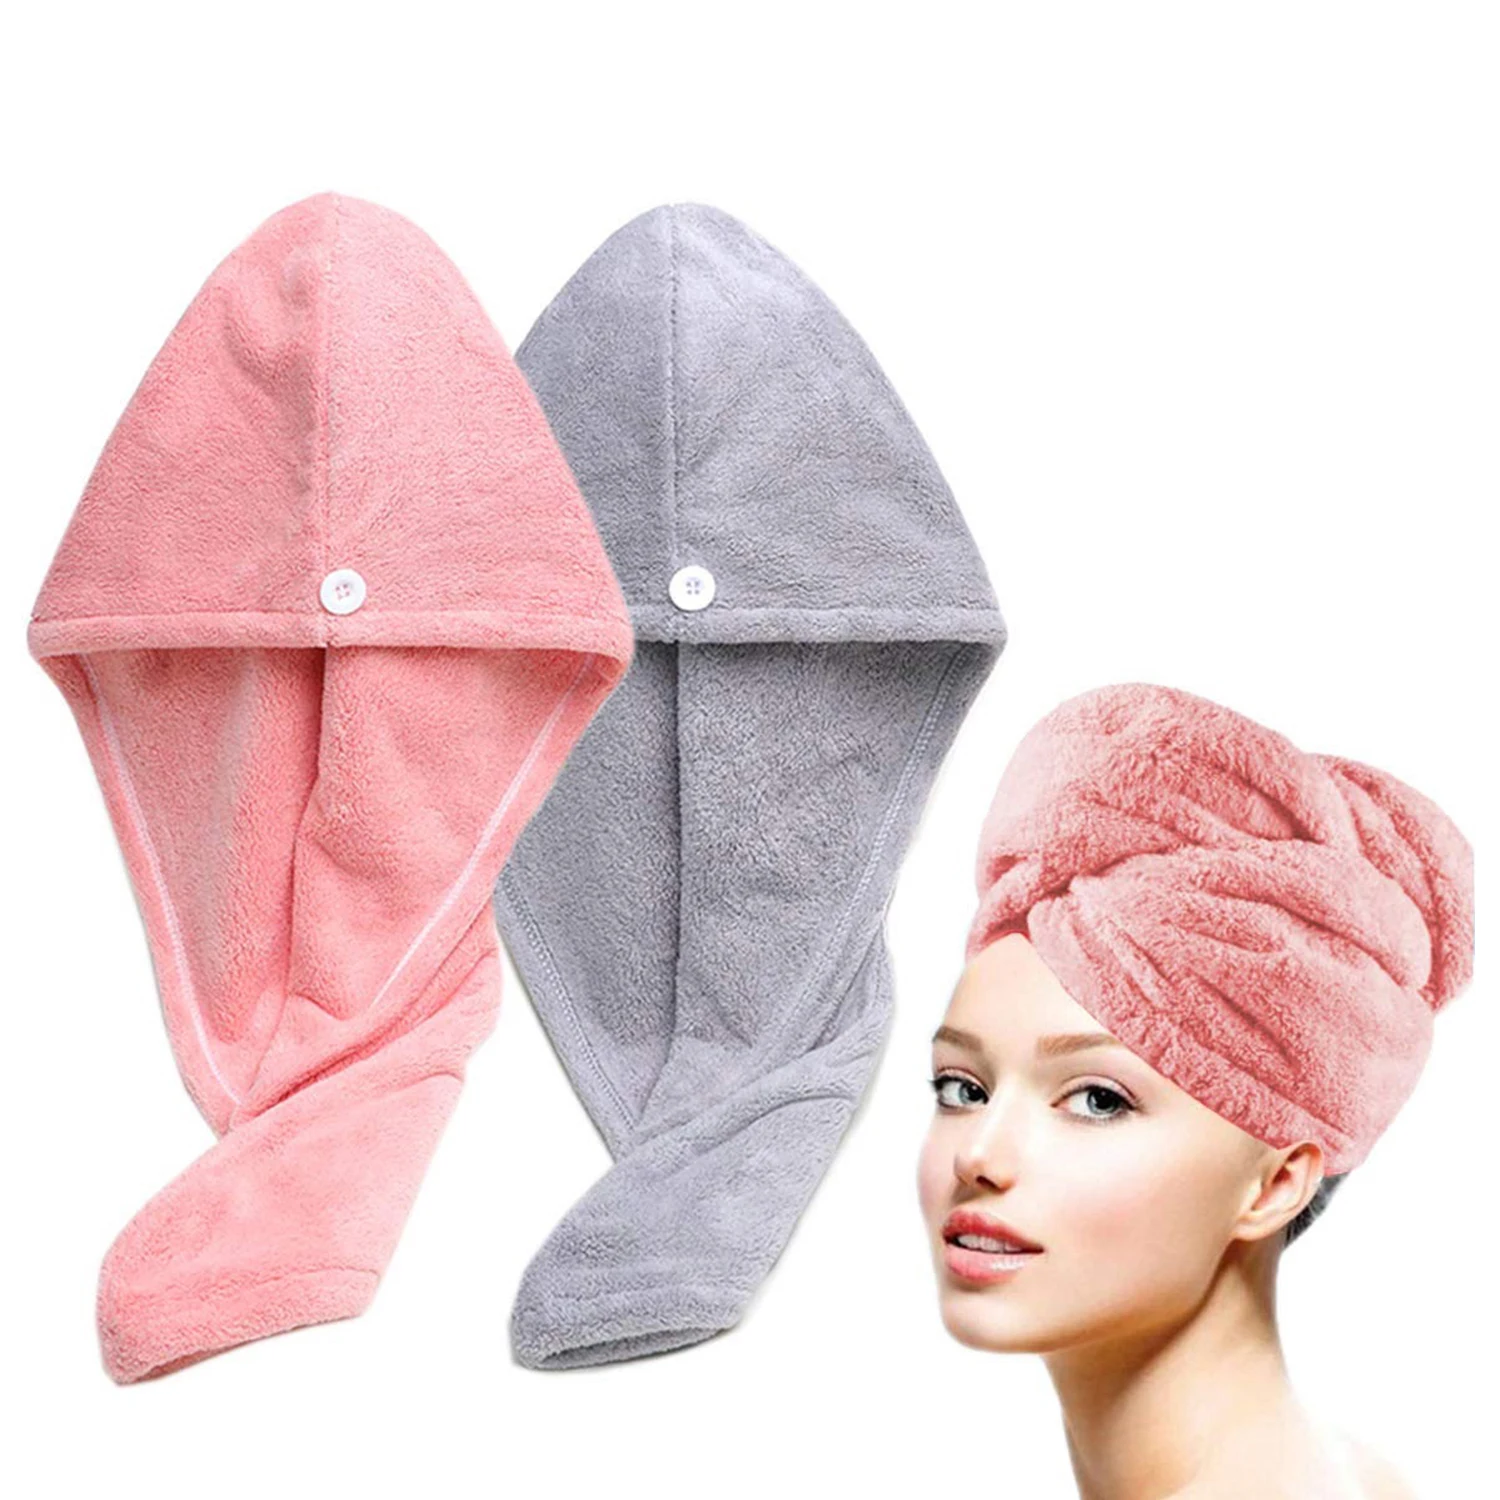 Super Absorbent Microfibre After Shower Quick Drying Soft Dry Hair Towel  For Women - Buy Dry Hair Towel,Quick Drying Soft Dry Hair Towel For Women,After  Shower Quick Drying Soft Dry Hair Towel